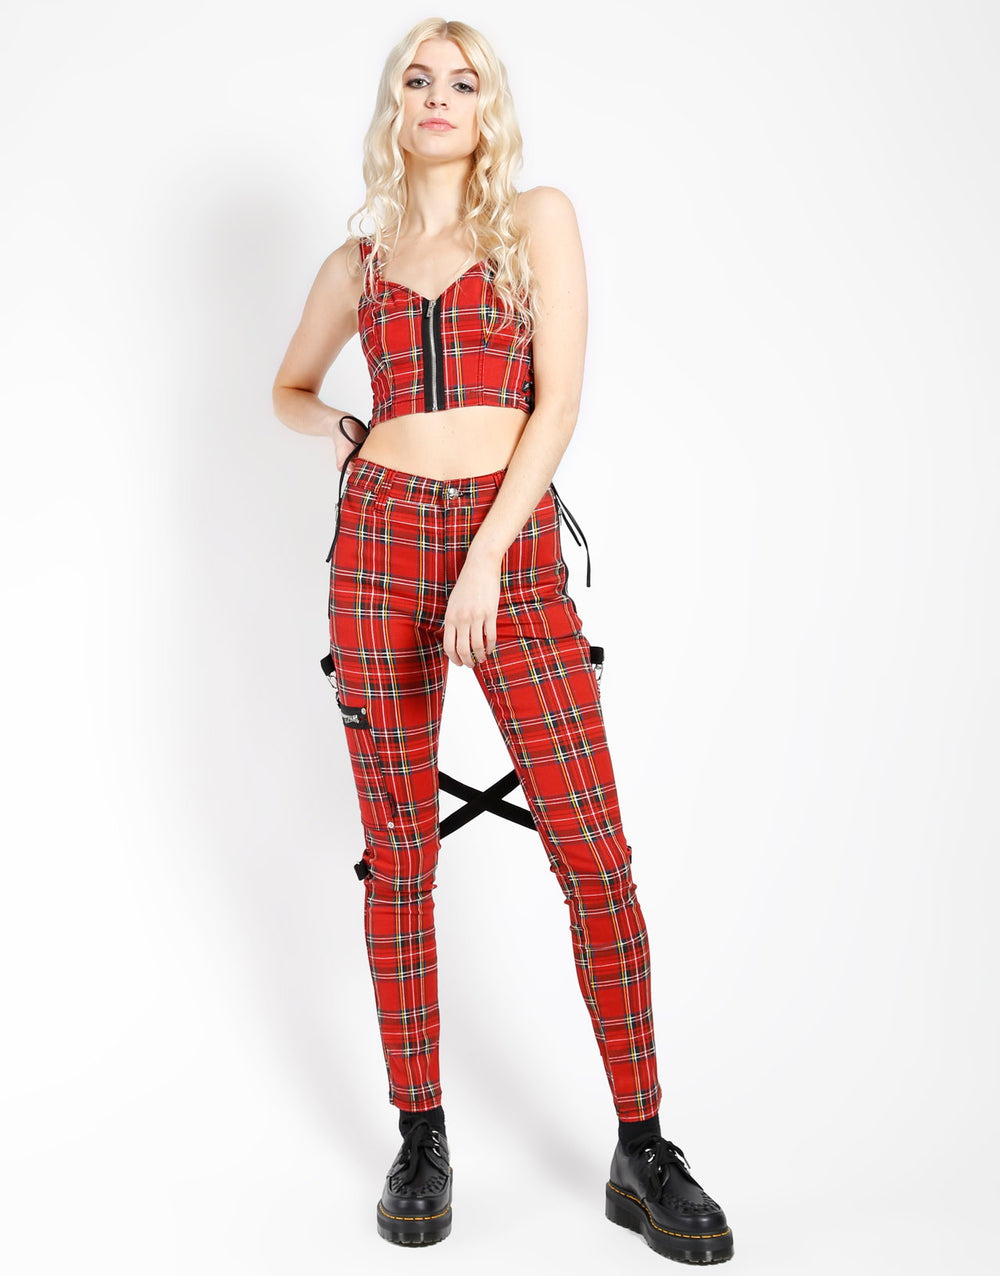 Red Tartan Checked Trousers Slim Plaid Pants (Made in the UK) | eBay